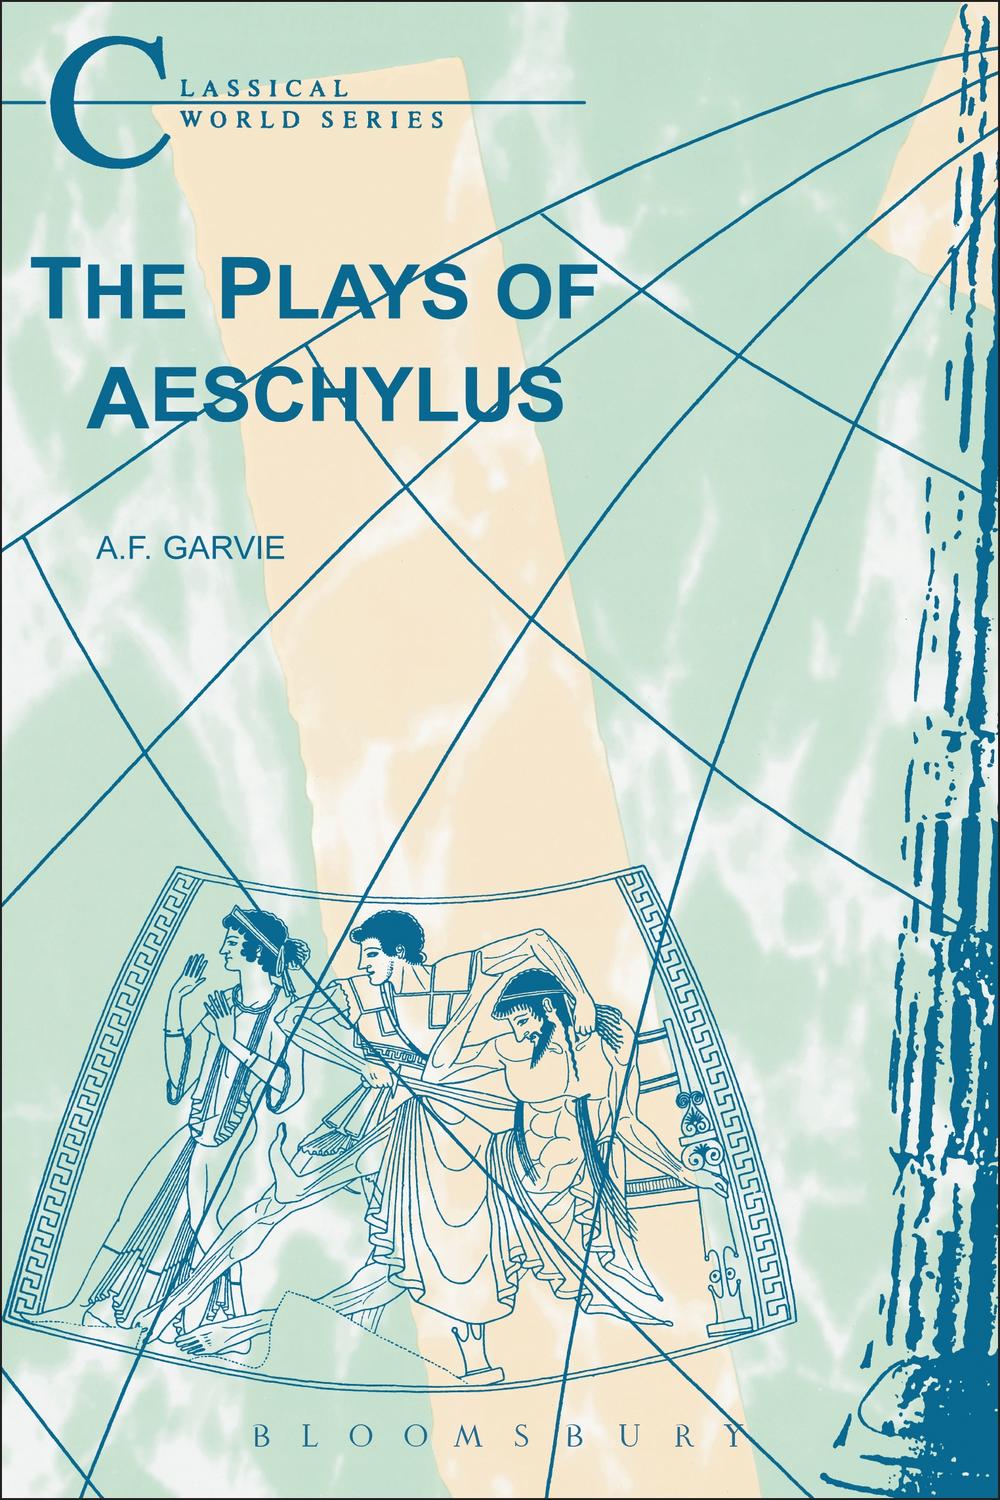 The Plays of Aeschylus - A. F. Garvie